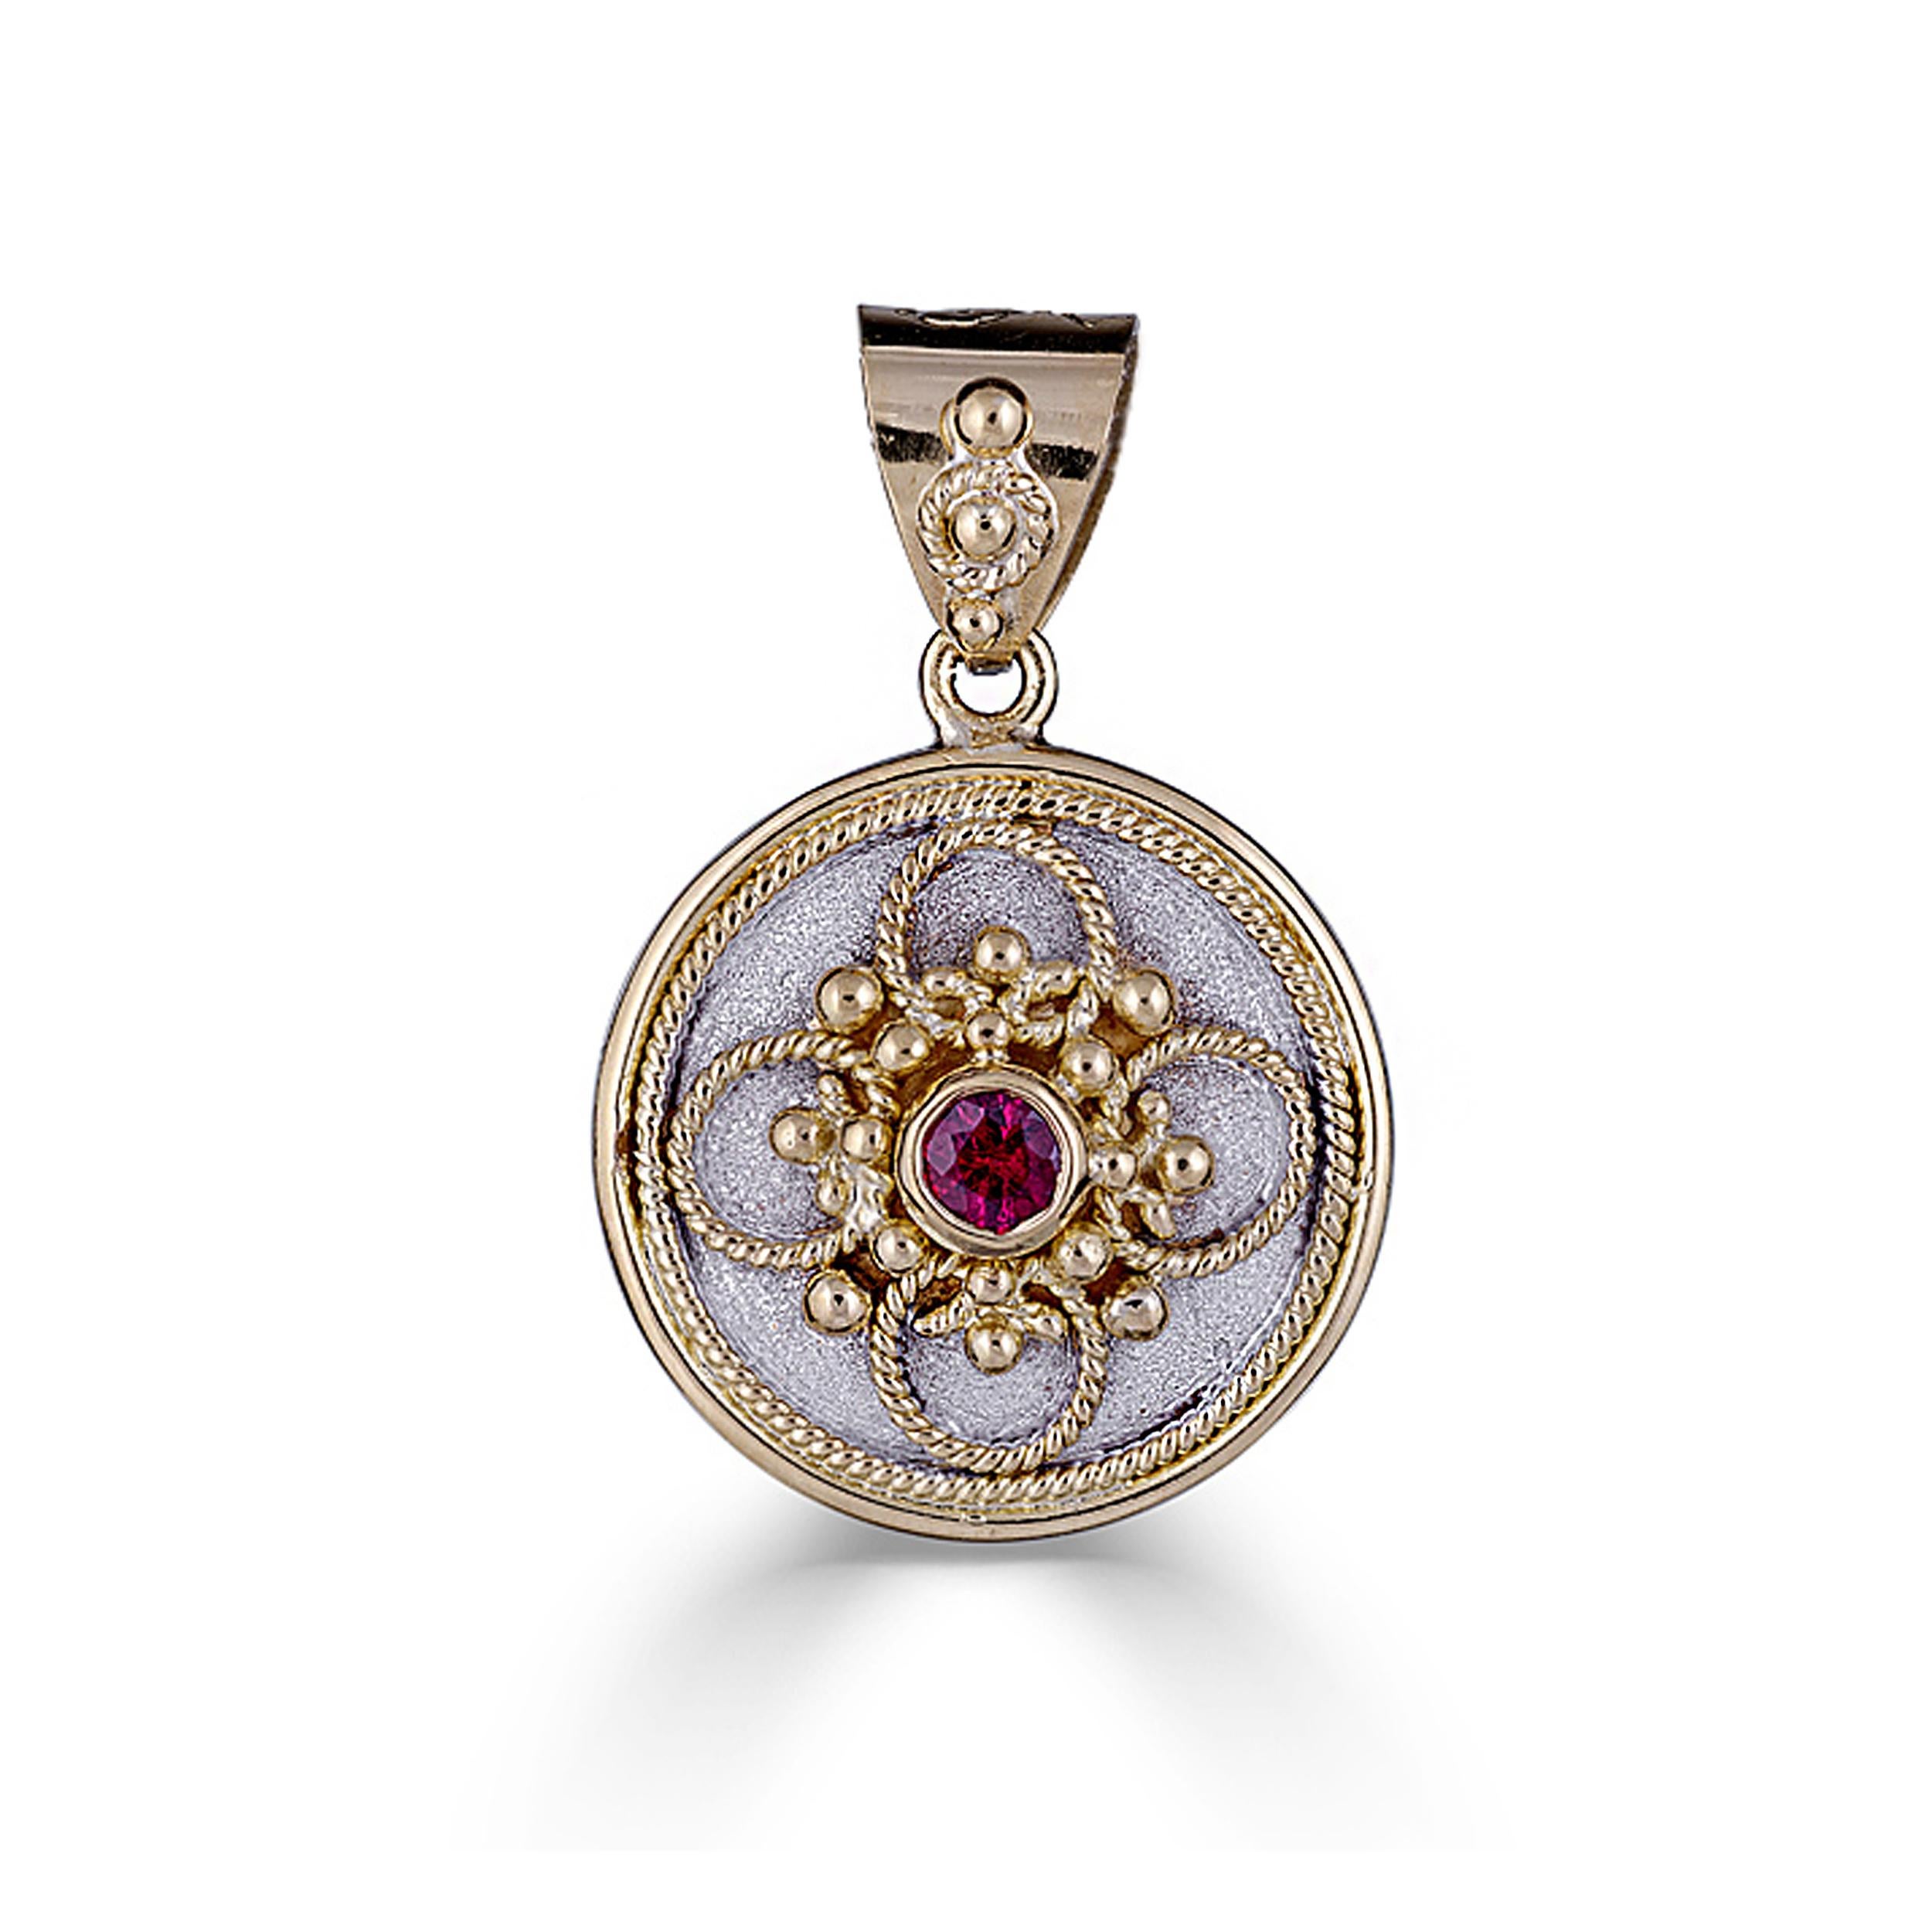 S.Georgios designer pendant is all handmade from solid 18 Karat Yellow Gold custom-made. This pendant is microscopically decorated - it has granulation work all the way around with gold beads and wires shaped like the last letter of the Greek